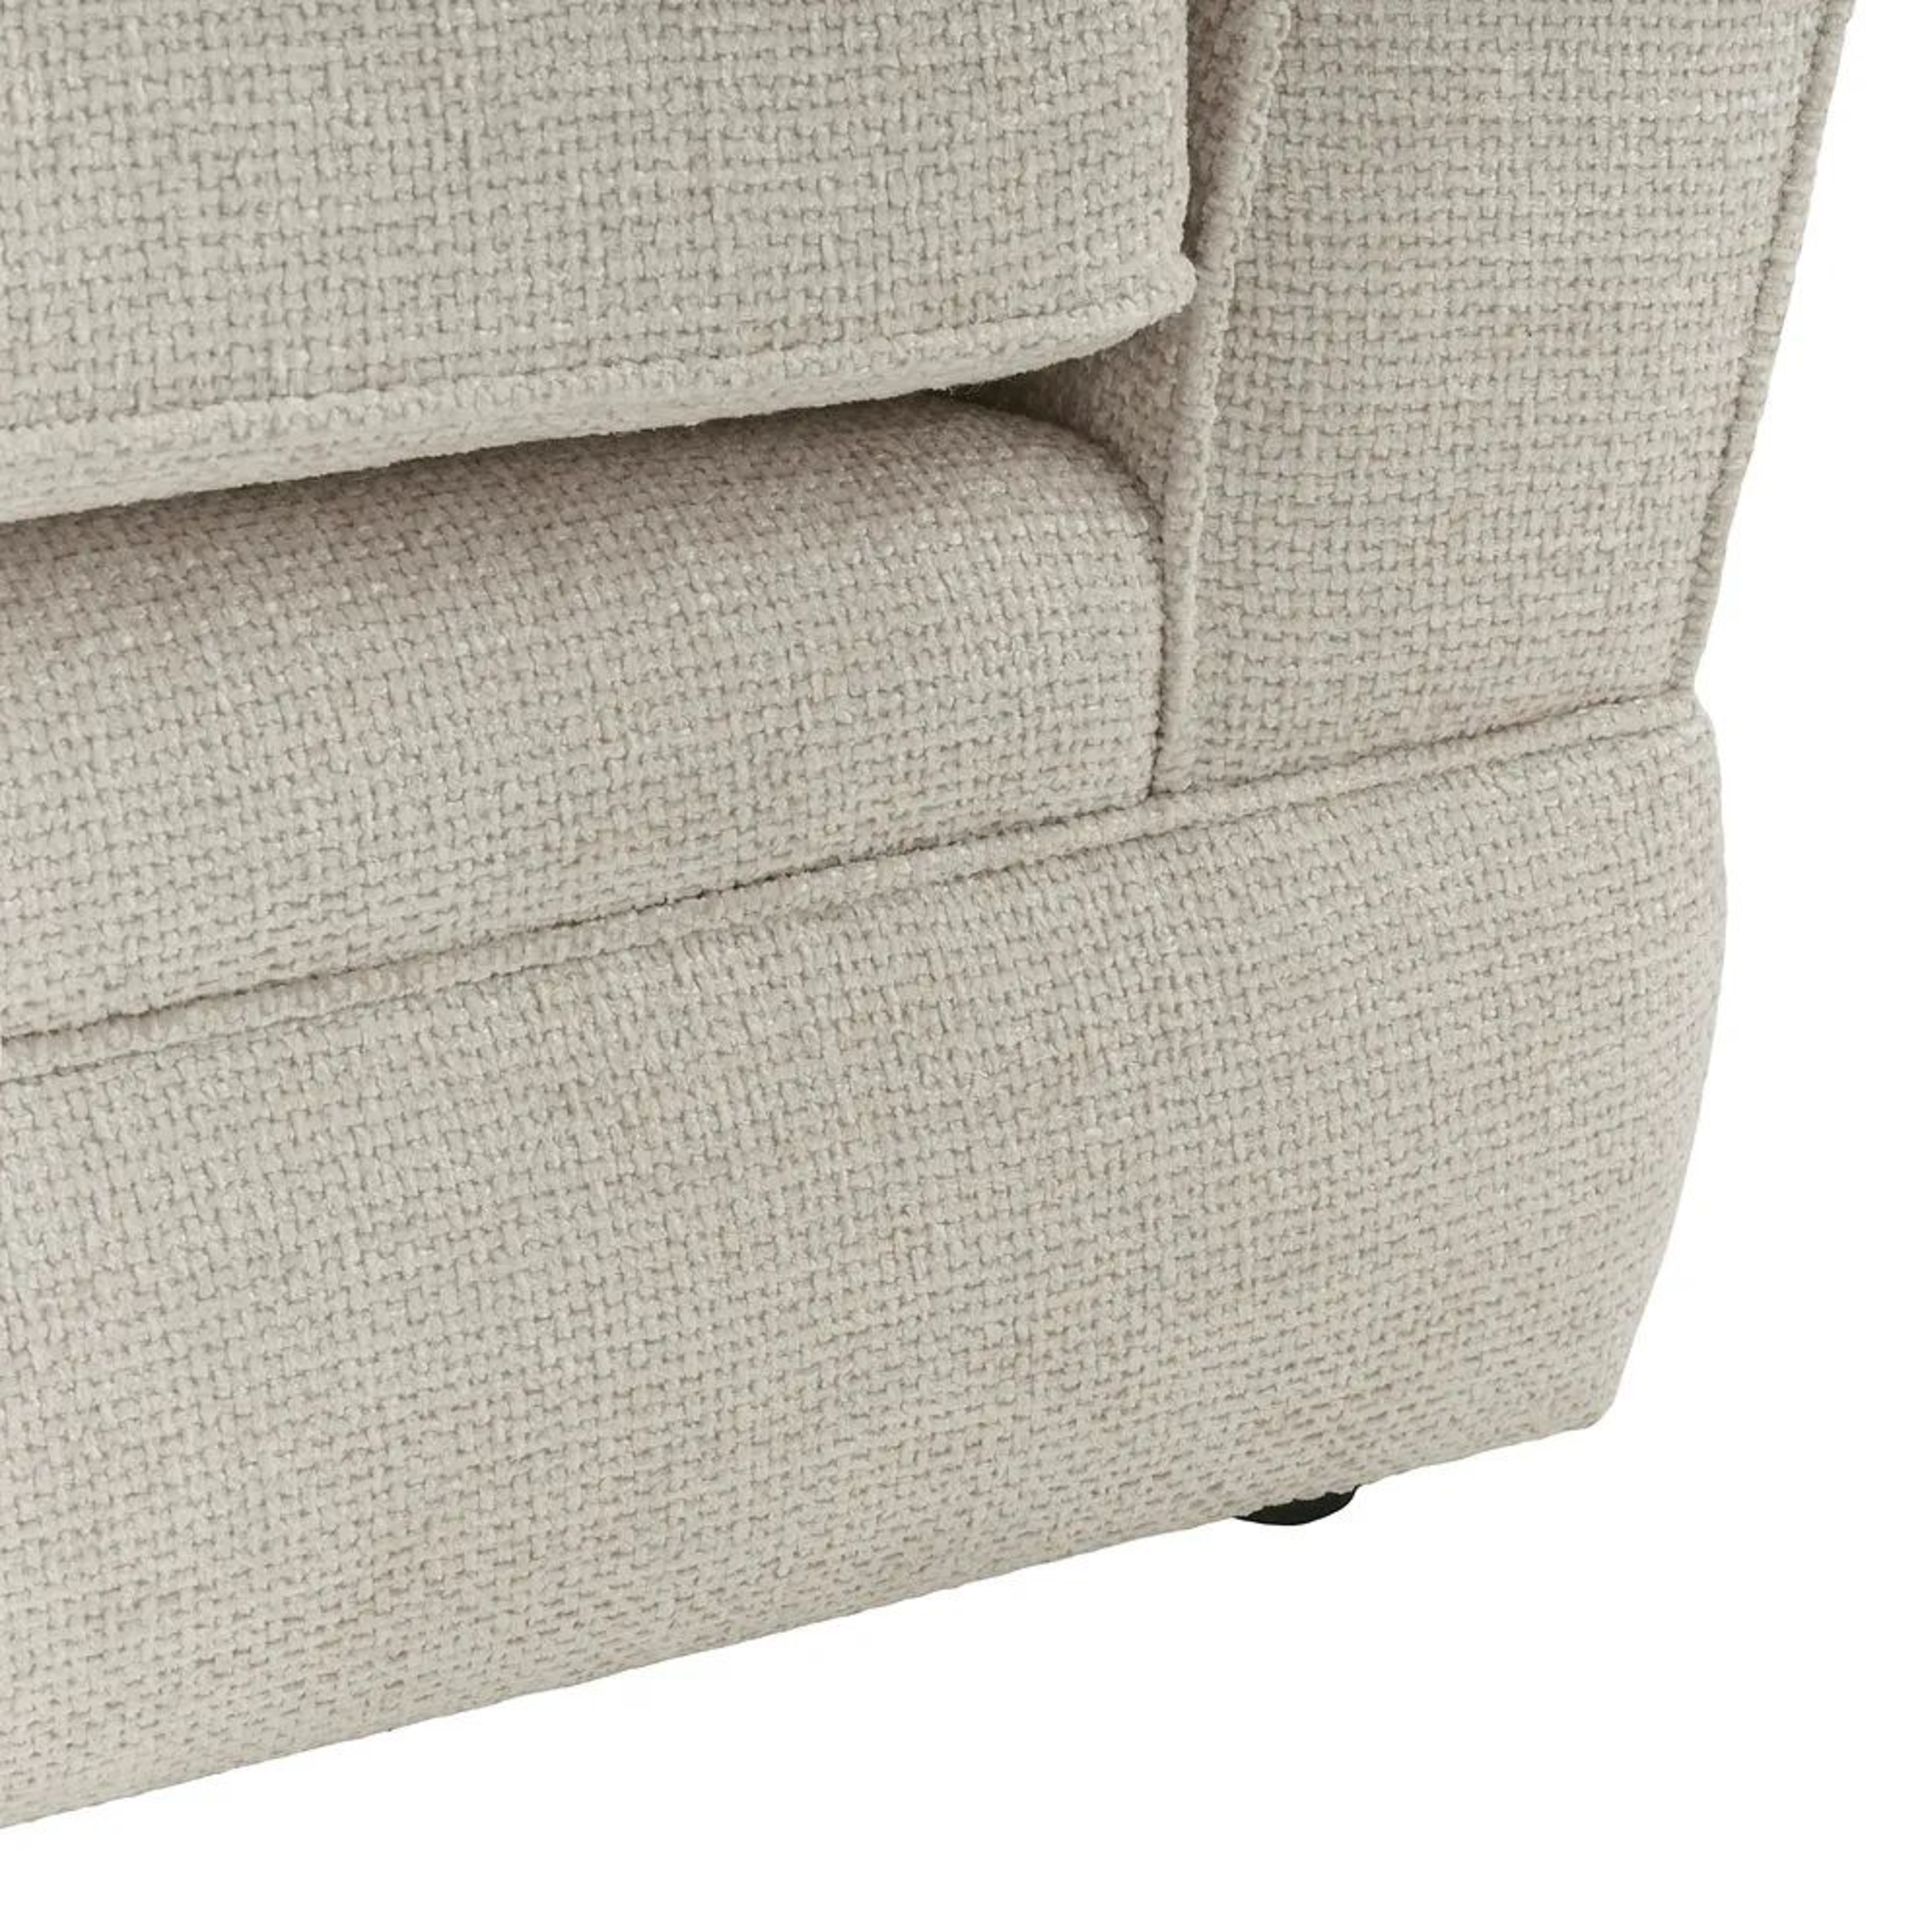 BRAND NEW CARRINGTON 4 Seater Pillow Back Split Sofa - NATURAL FABRIC. RRP £1149. Bring a modern - Image 5 of 8